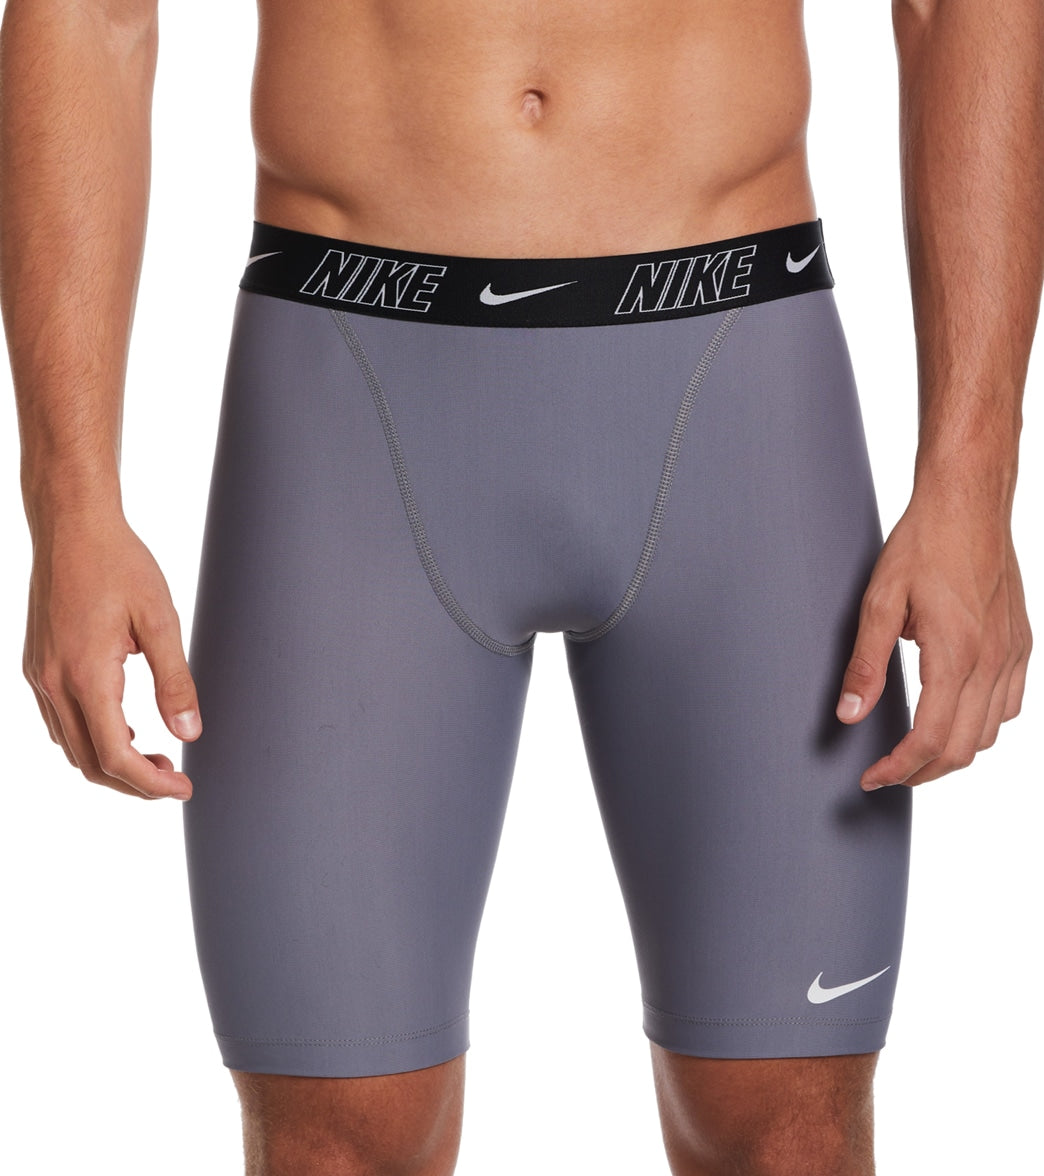 Perseguir Valle Increíble Nike Men's Logo Tape Jammer Swimsuit at SwimOutlet.com